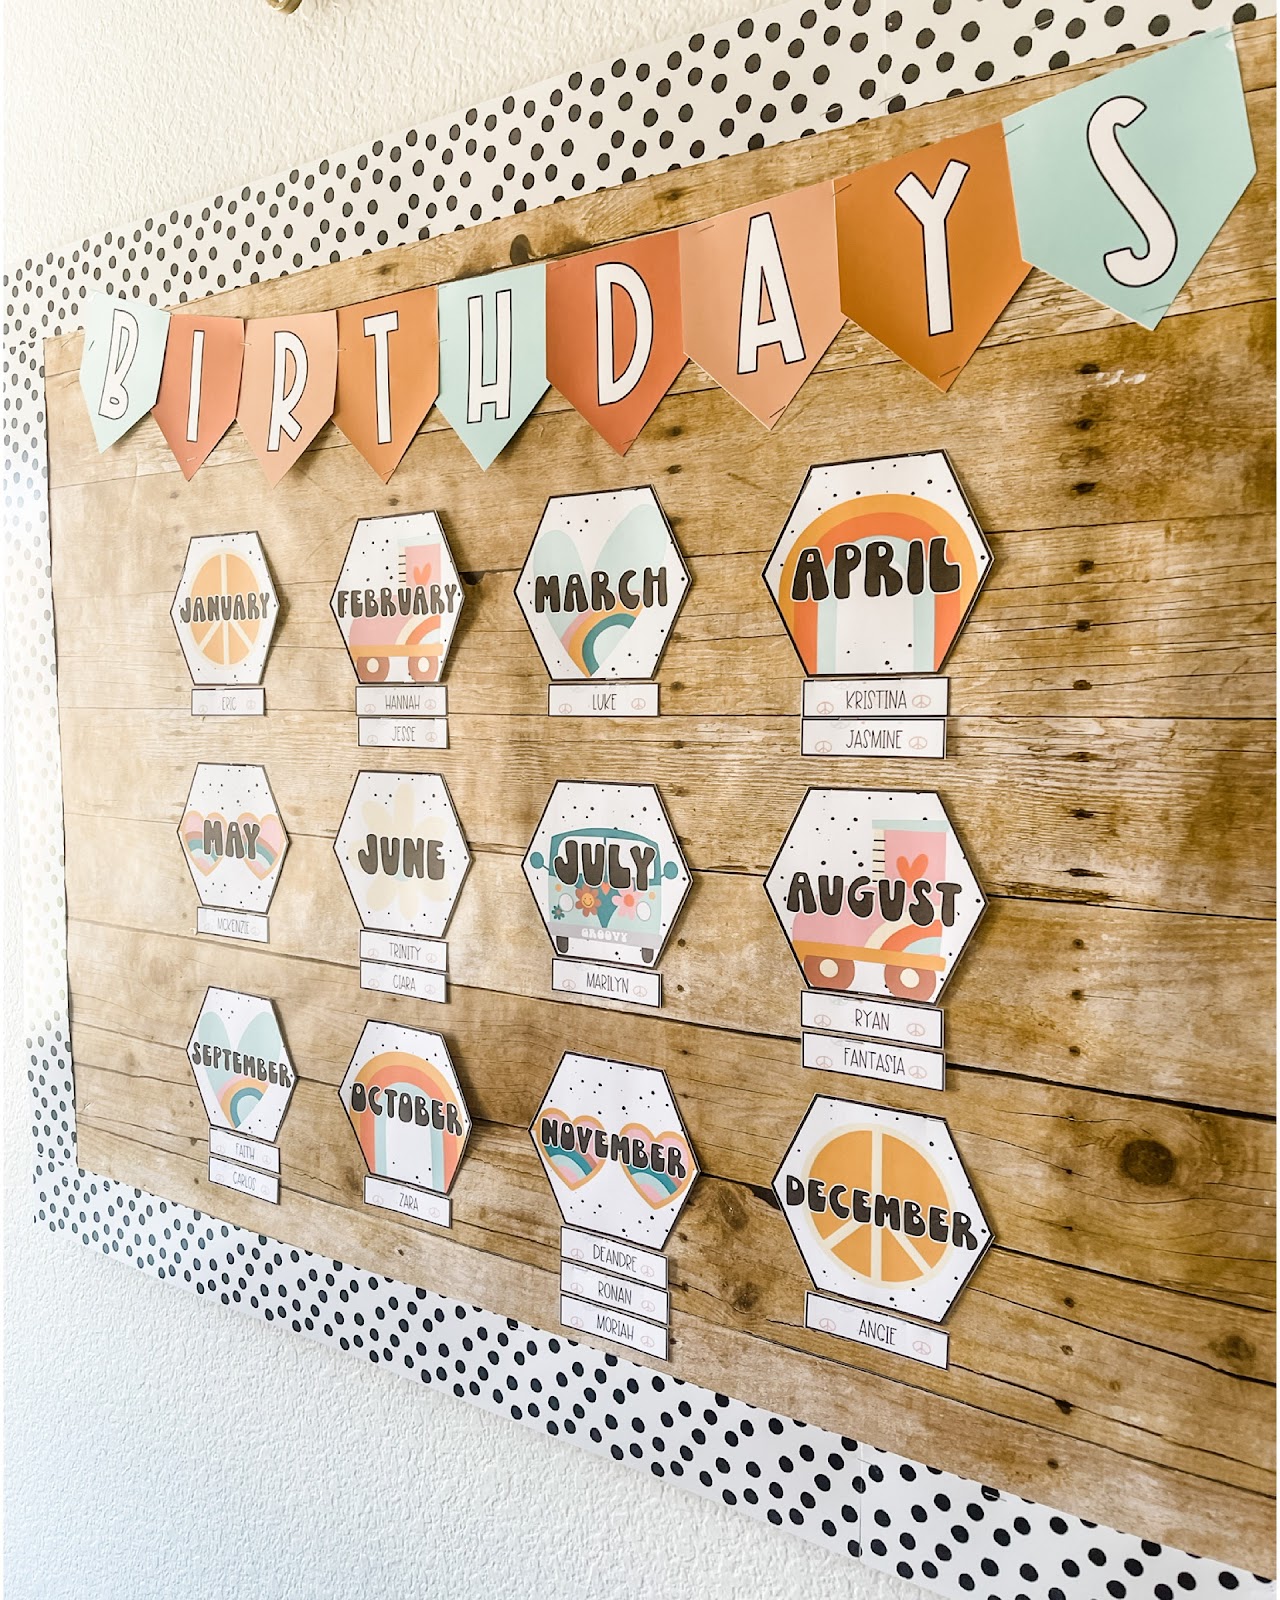 This image shows a bulletin board display with a heading reading "Birthdays". There is a card for each month of the year with smaller cards for student names underneath. The month cards are decorated with fun, retro images like roller skates and peace signs. 